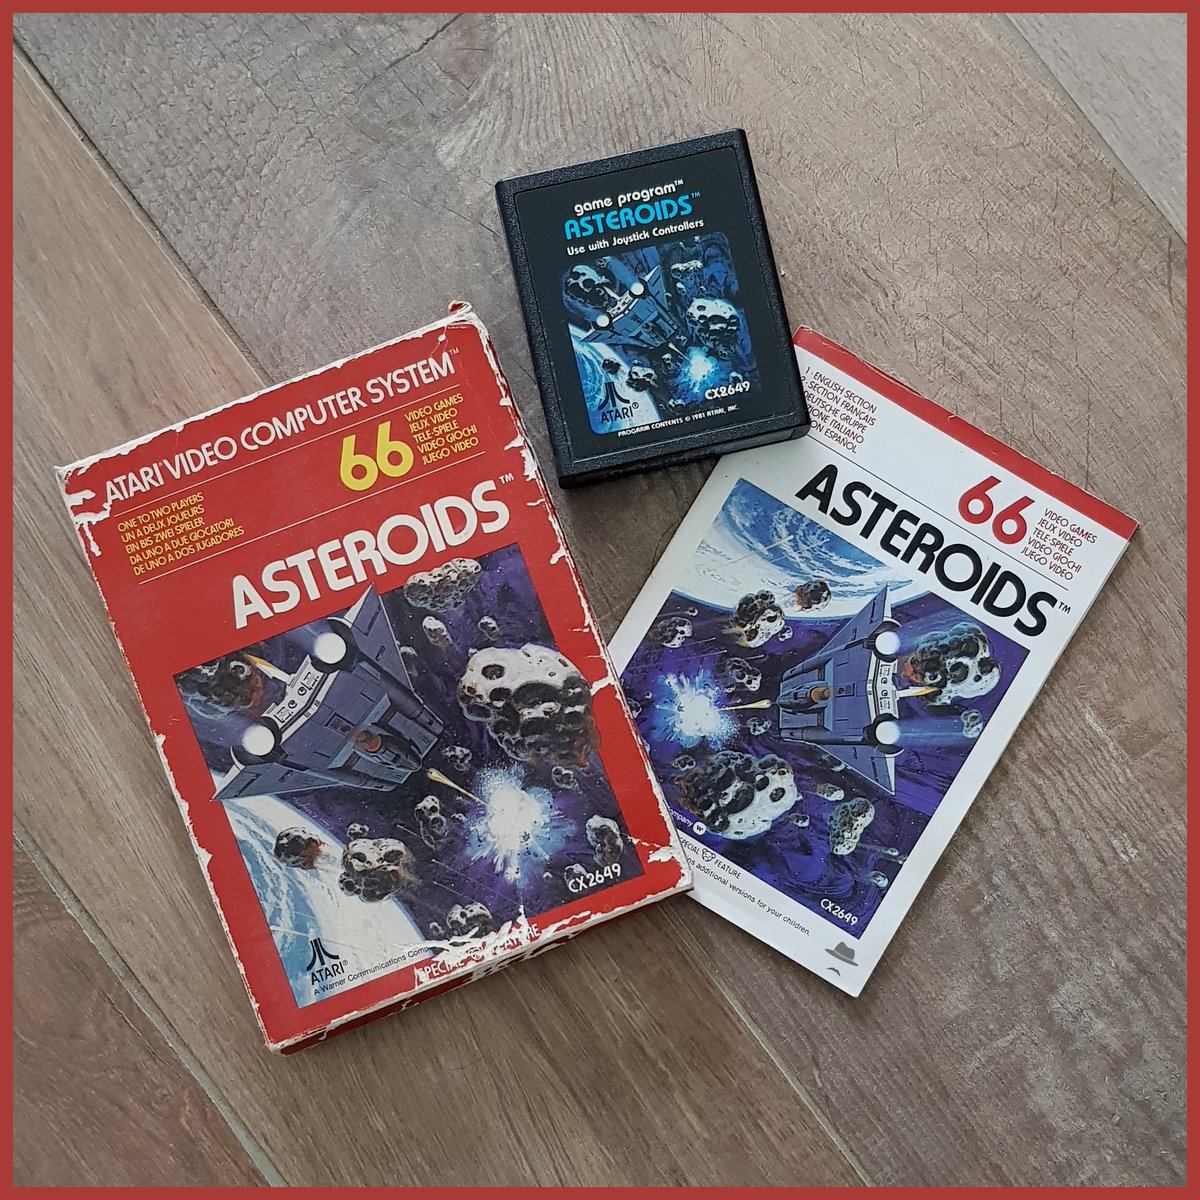 A long time ago I bought this beat up game at a flea market... and had so much fun with it!!! #Retro #RetroComputing #RetroComputer #RetroGaming #RetroGame #Atari #Atari2600 #Asteroids